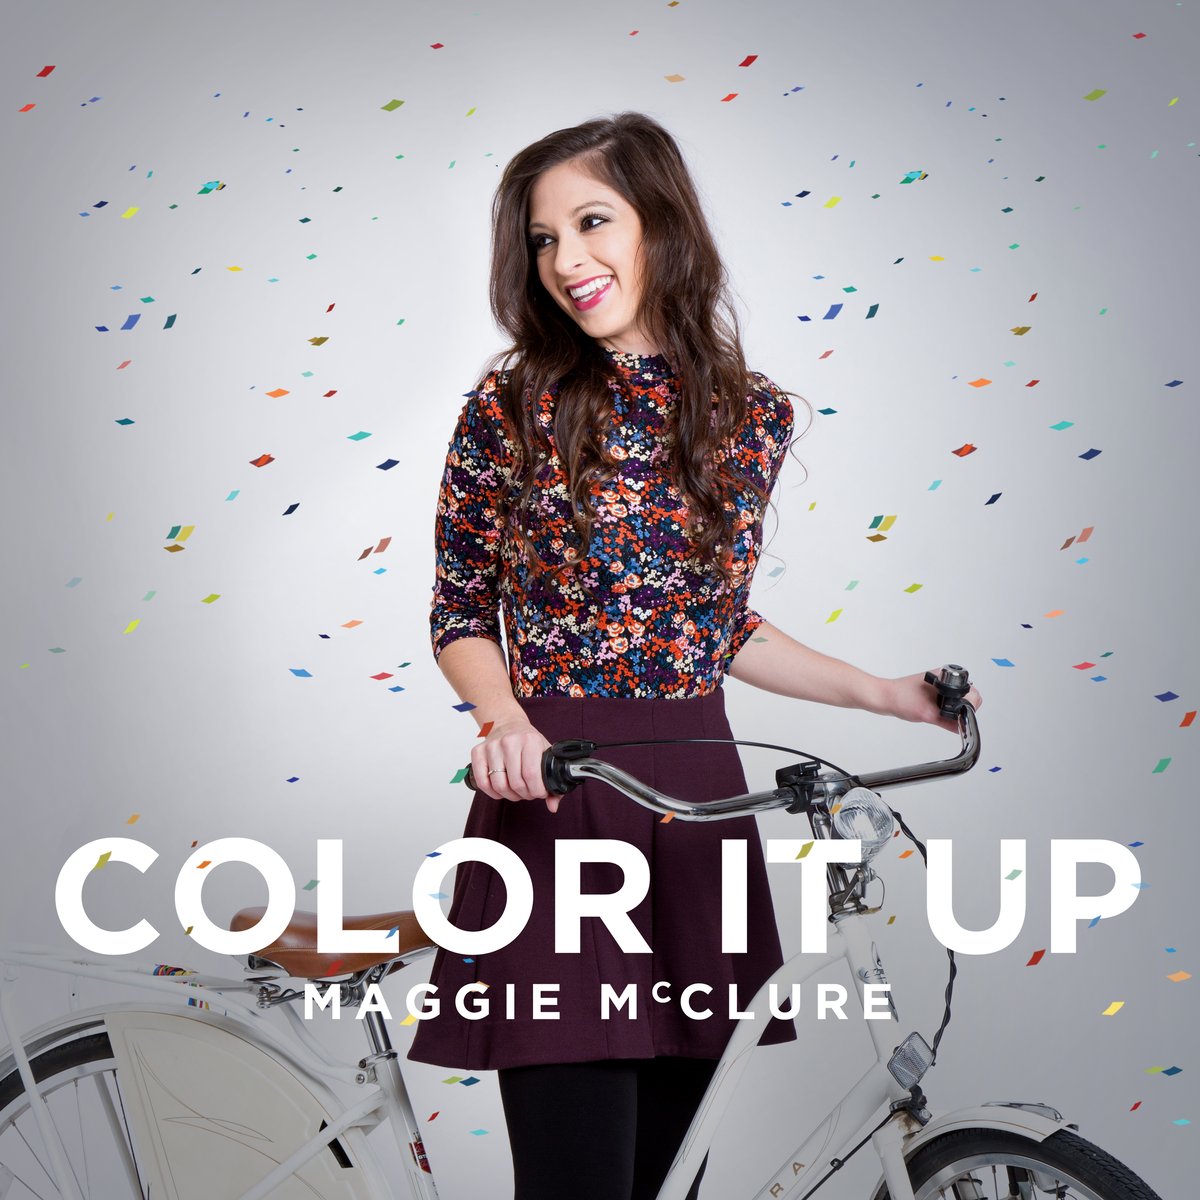 Image of Maggie McClure New EP "Color It Up" Limited Edition